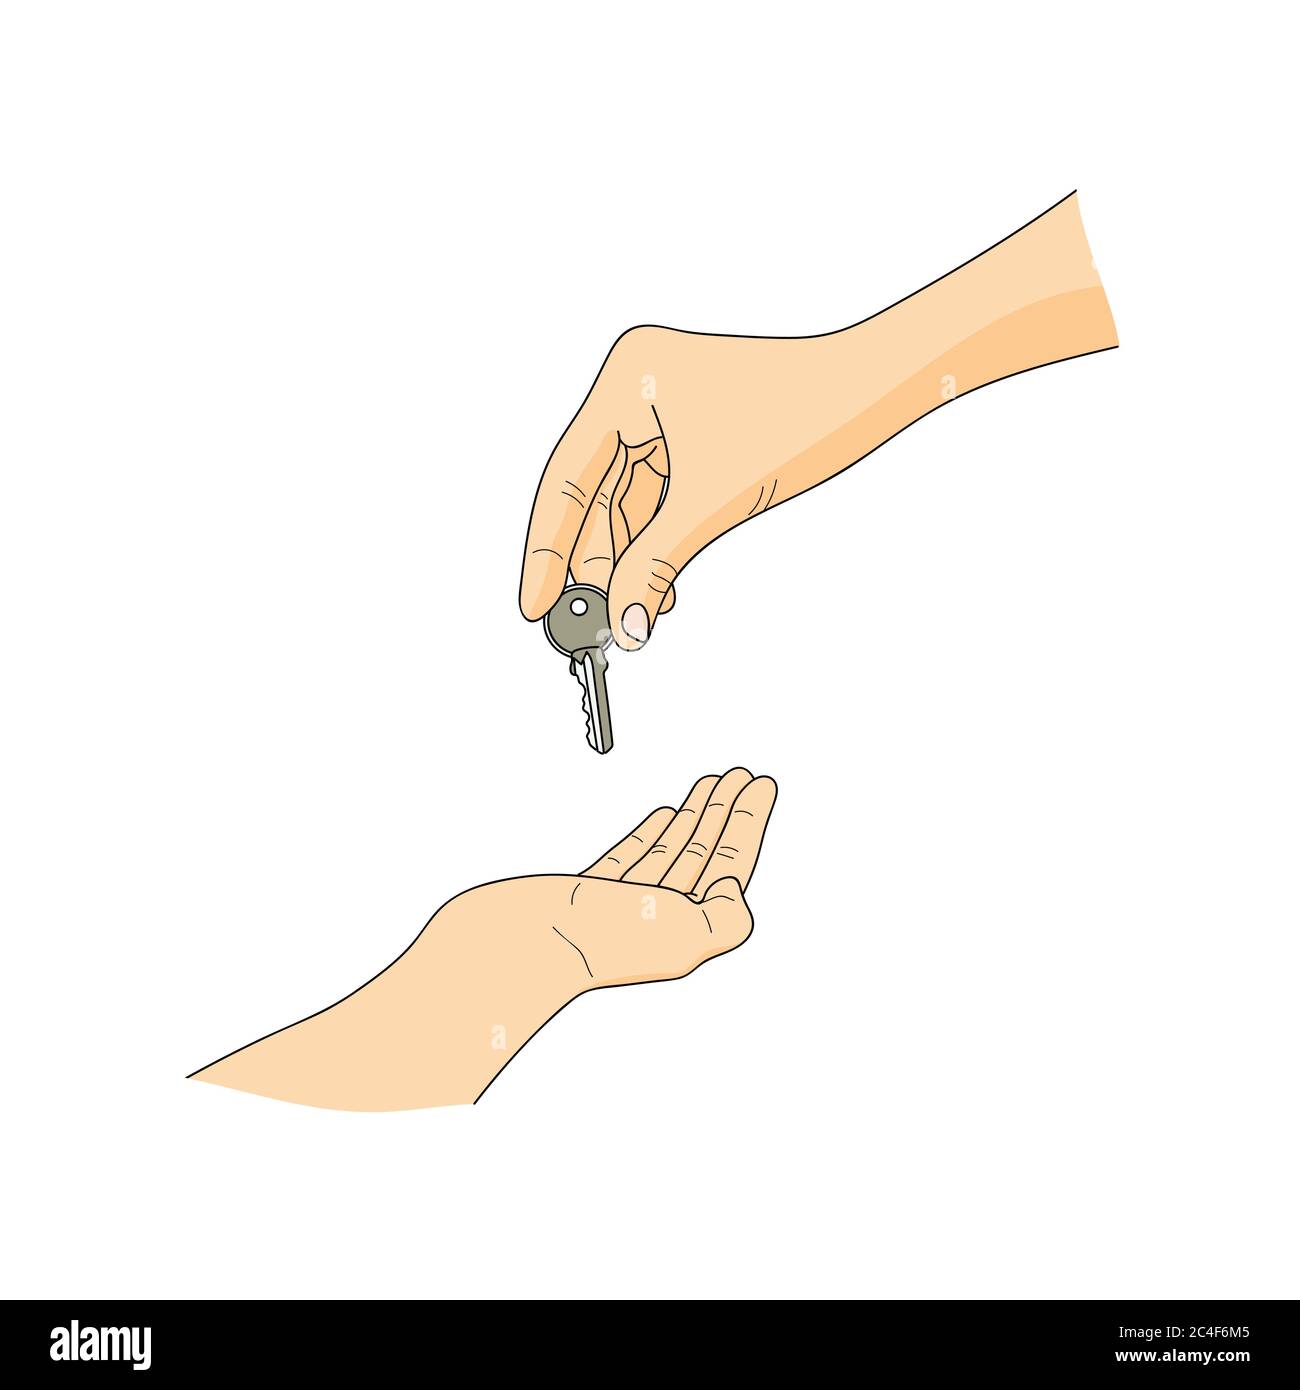 Hand giving a key. Handing over a key from one person to another. Purchase concept. Vector illustration. Stock Vector